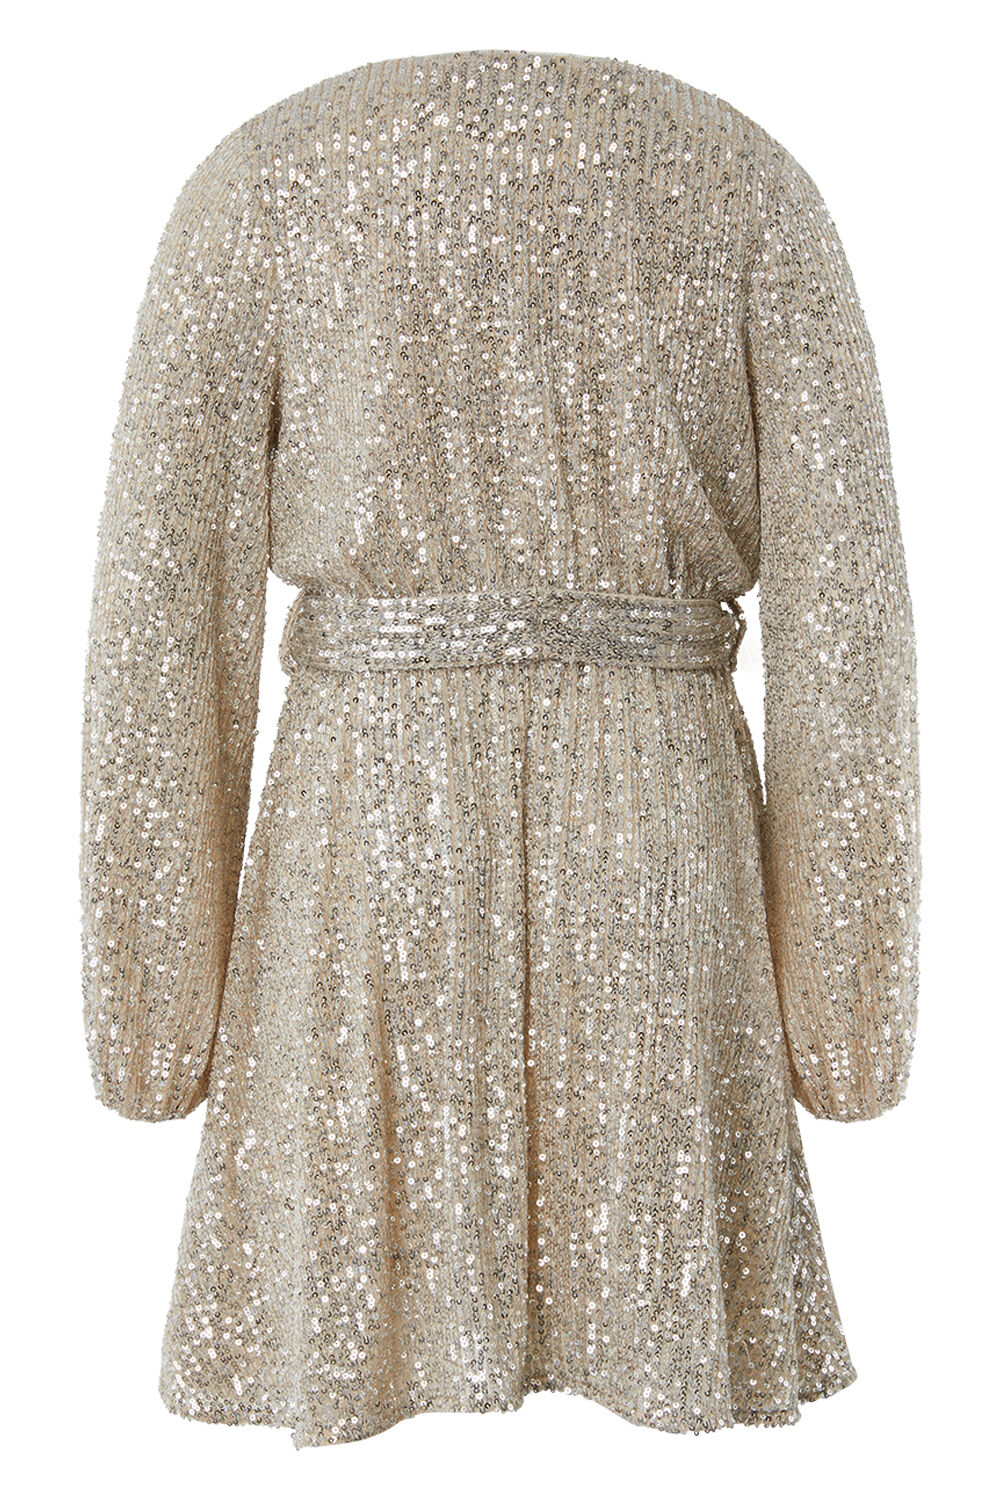 GIRLS SEQUIN WRAP DRESS in colour TUSCANY